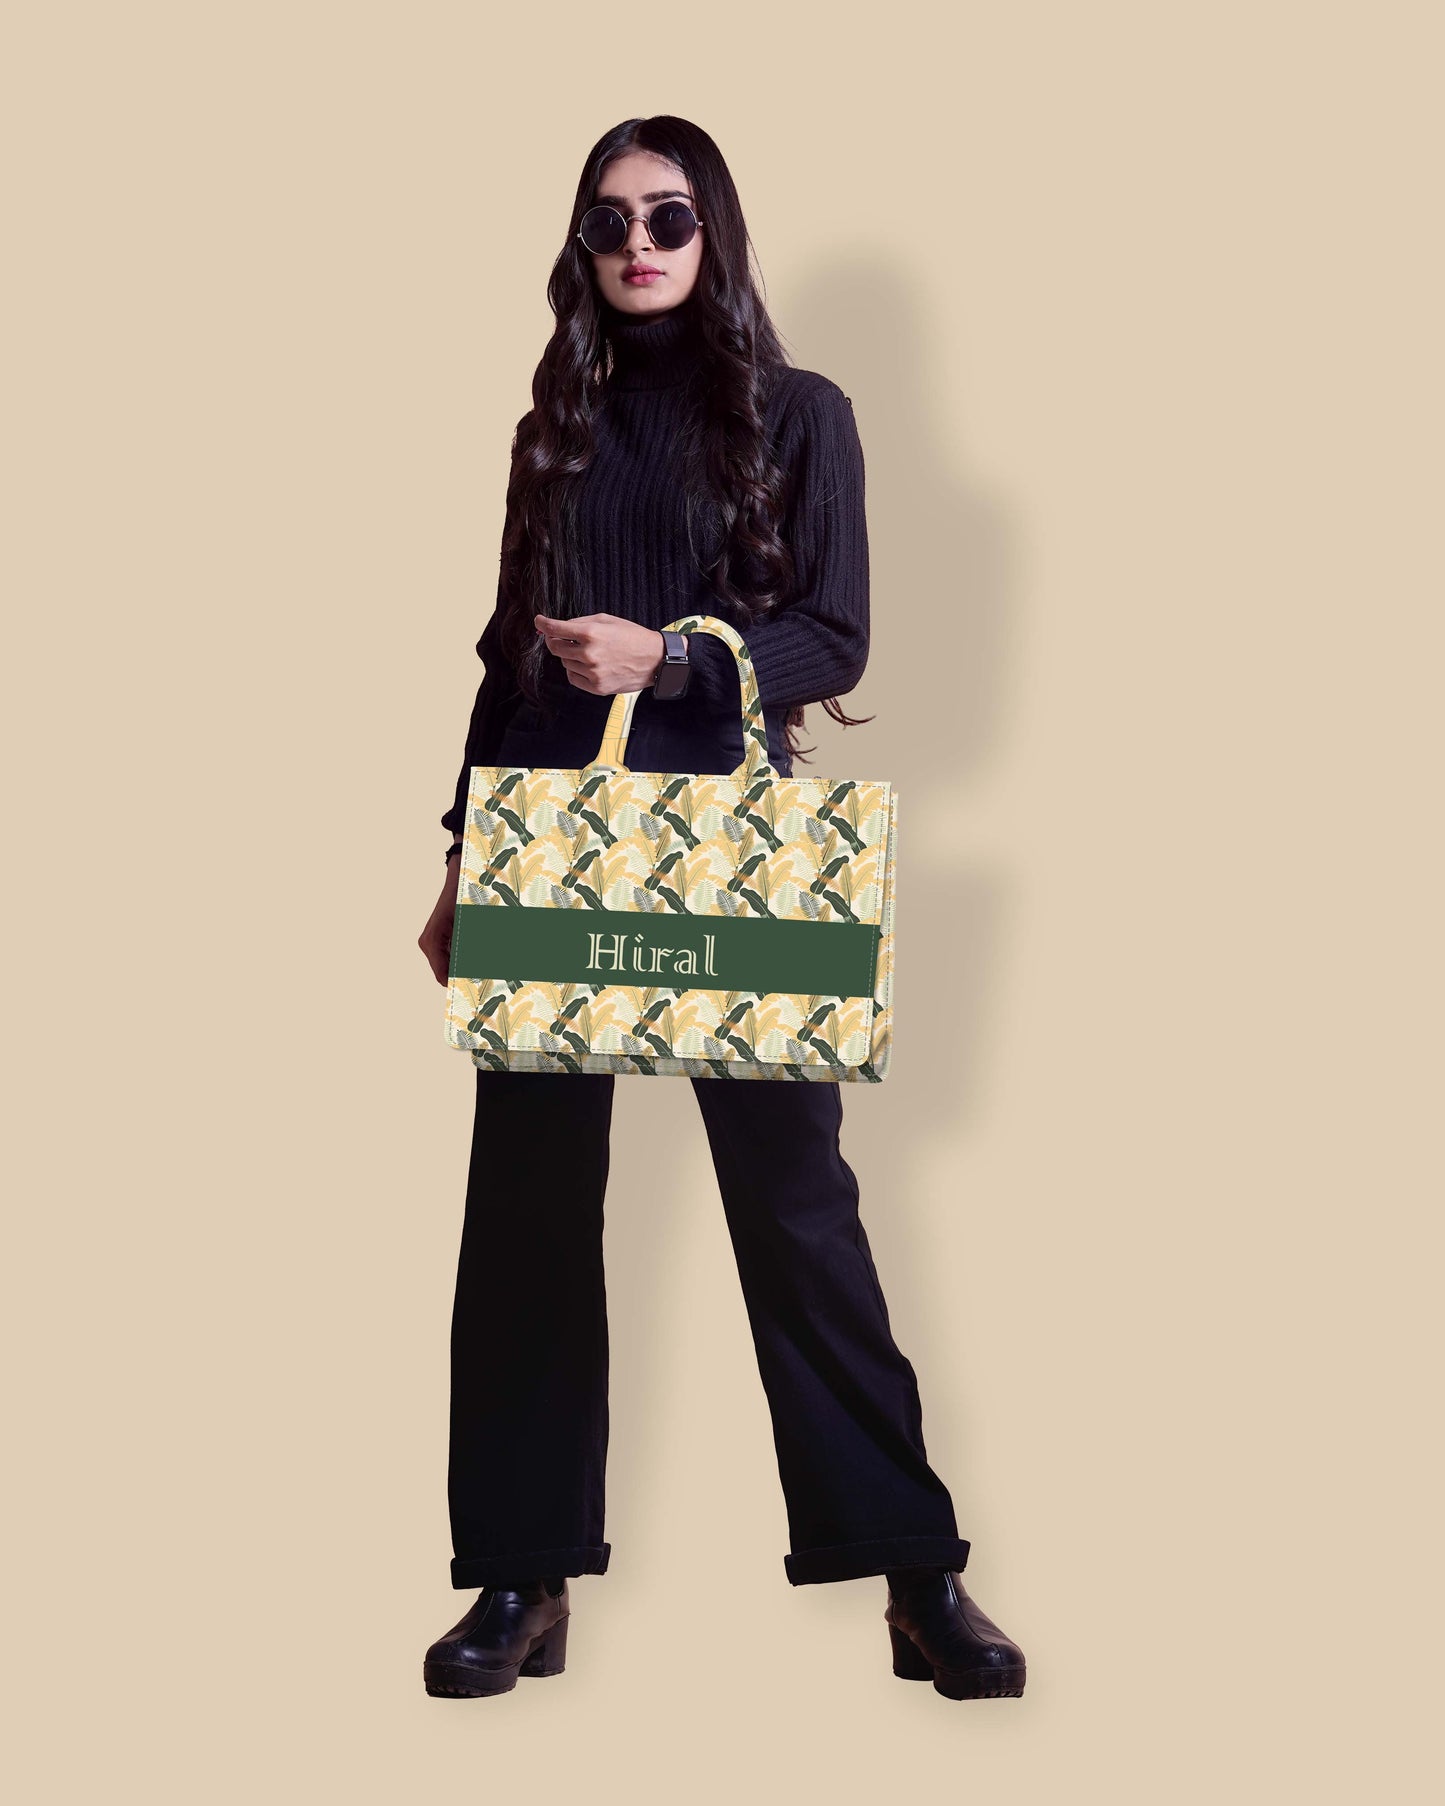 Customized Tote Bag Designed With Palm And Banana Leaves